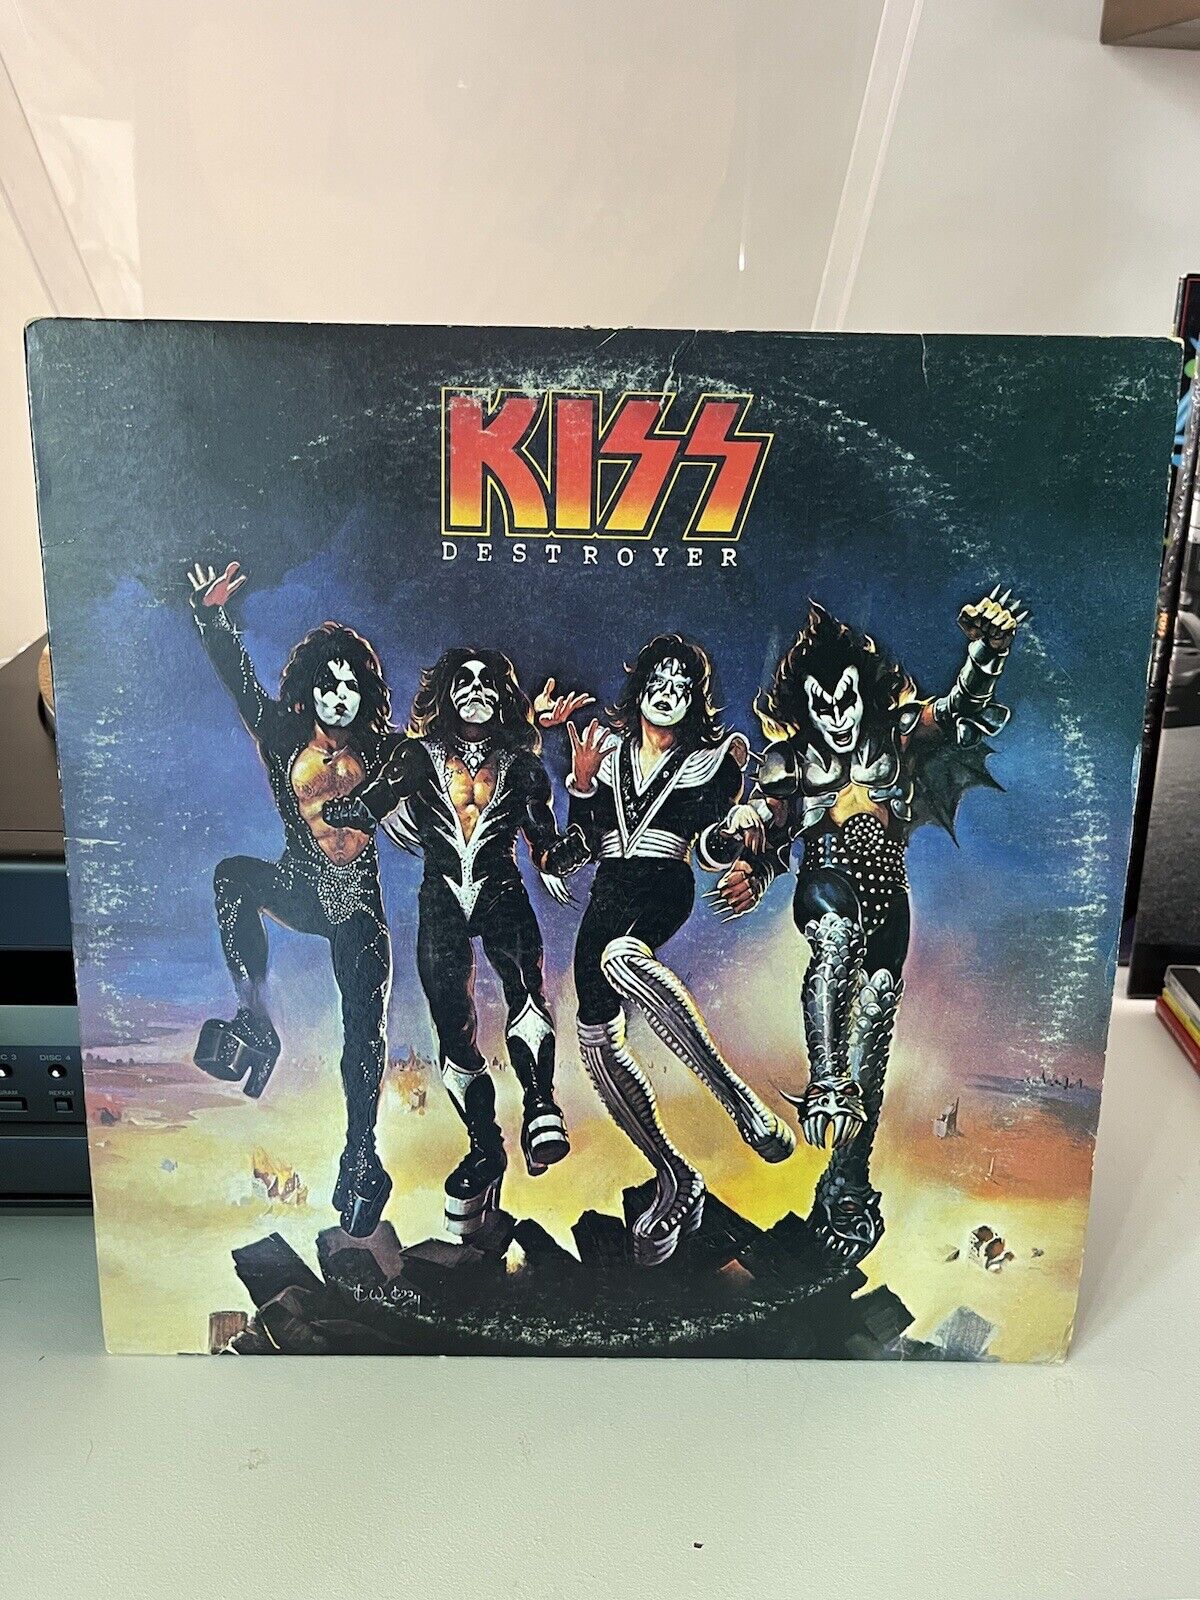 KISS Destroyer Cover/inner Only- RCA Record Club Edition-No Record Included